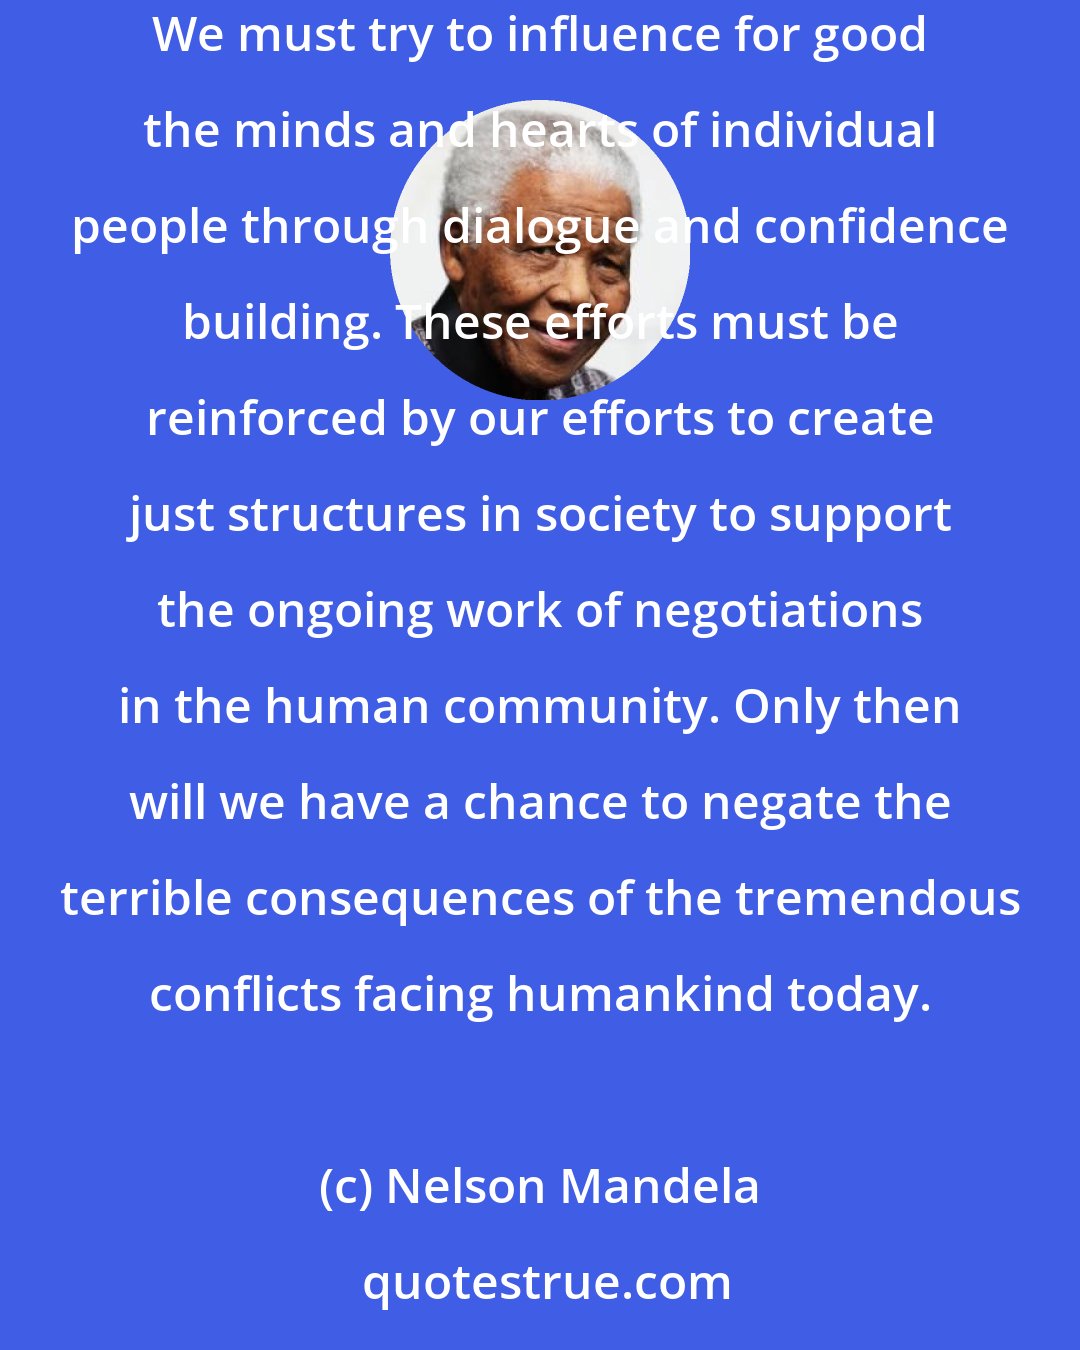 Nelson Mandela: Our efforts to counter hatred, intolerance, and indifference must continue simultaneously at individual and structural levels. We must try to influence for good the minds and hearts of individual people through dialogue and confidence building. These efforts must be reinforced by our efforts to create just structures in society to support the ongoing work of negotiations in the human community. Only then will we have a chance to negate the terrible consequences of the tremendous conflicts facing humankind today.